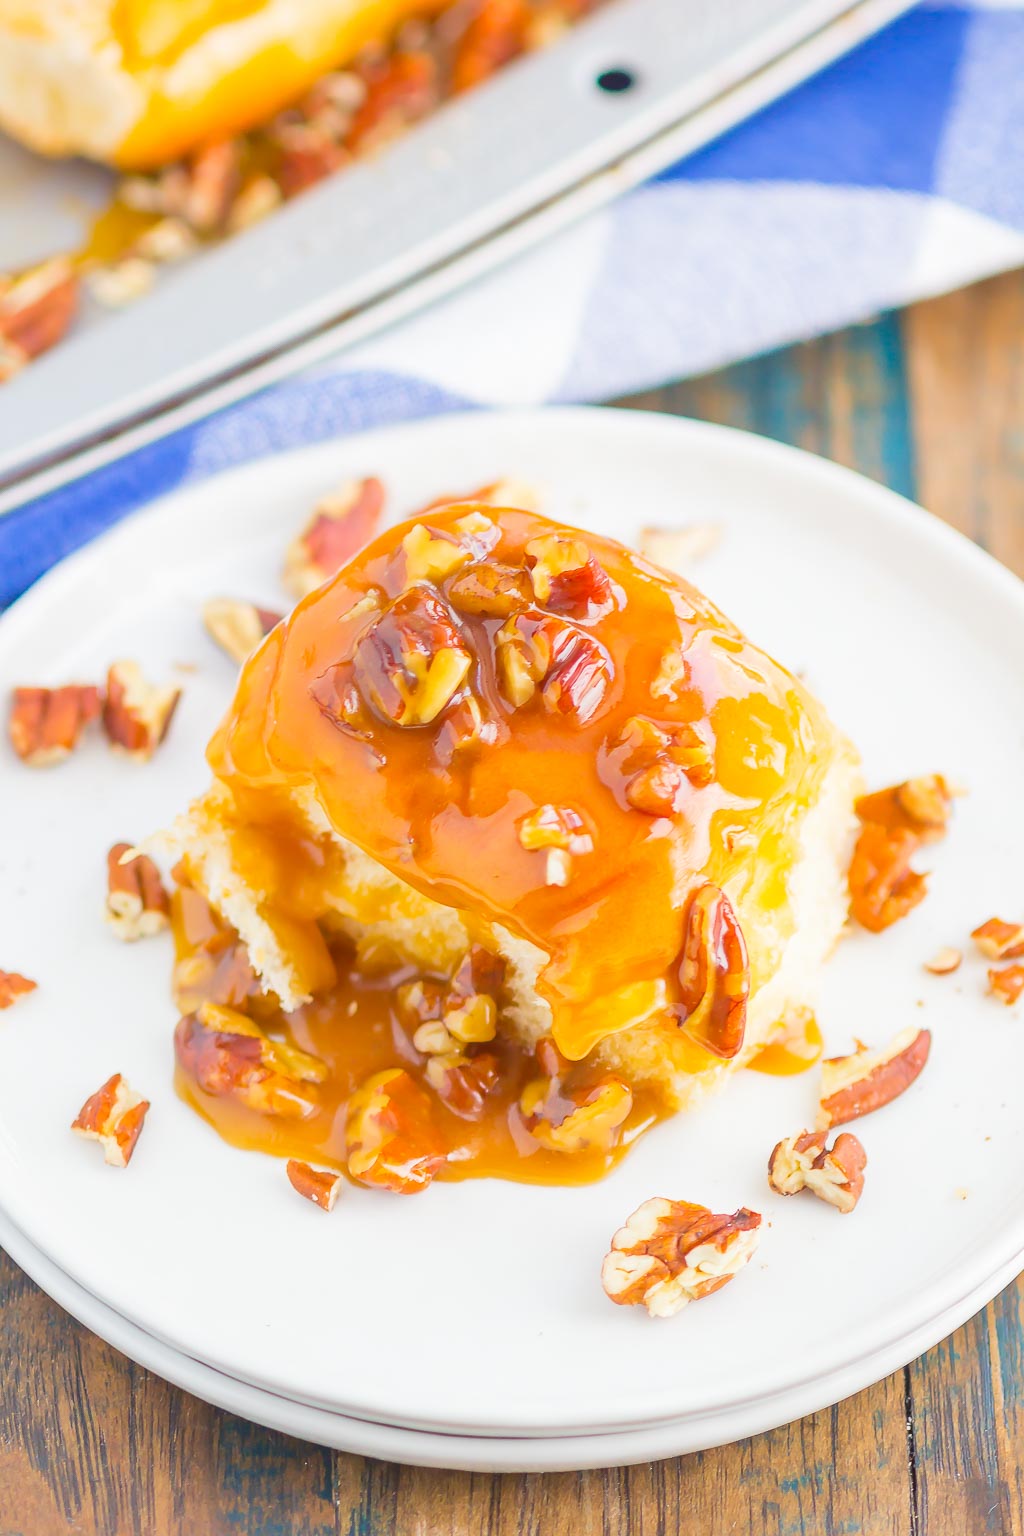 Caramel Sticky Buns are soft, sweet, and ready in just 30 minutes. Sweet rolls are topped with a rich caramel sauce, chopped pecans, and then baked until golden. Perfect for breakfast or dessert!